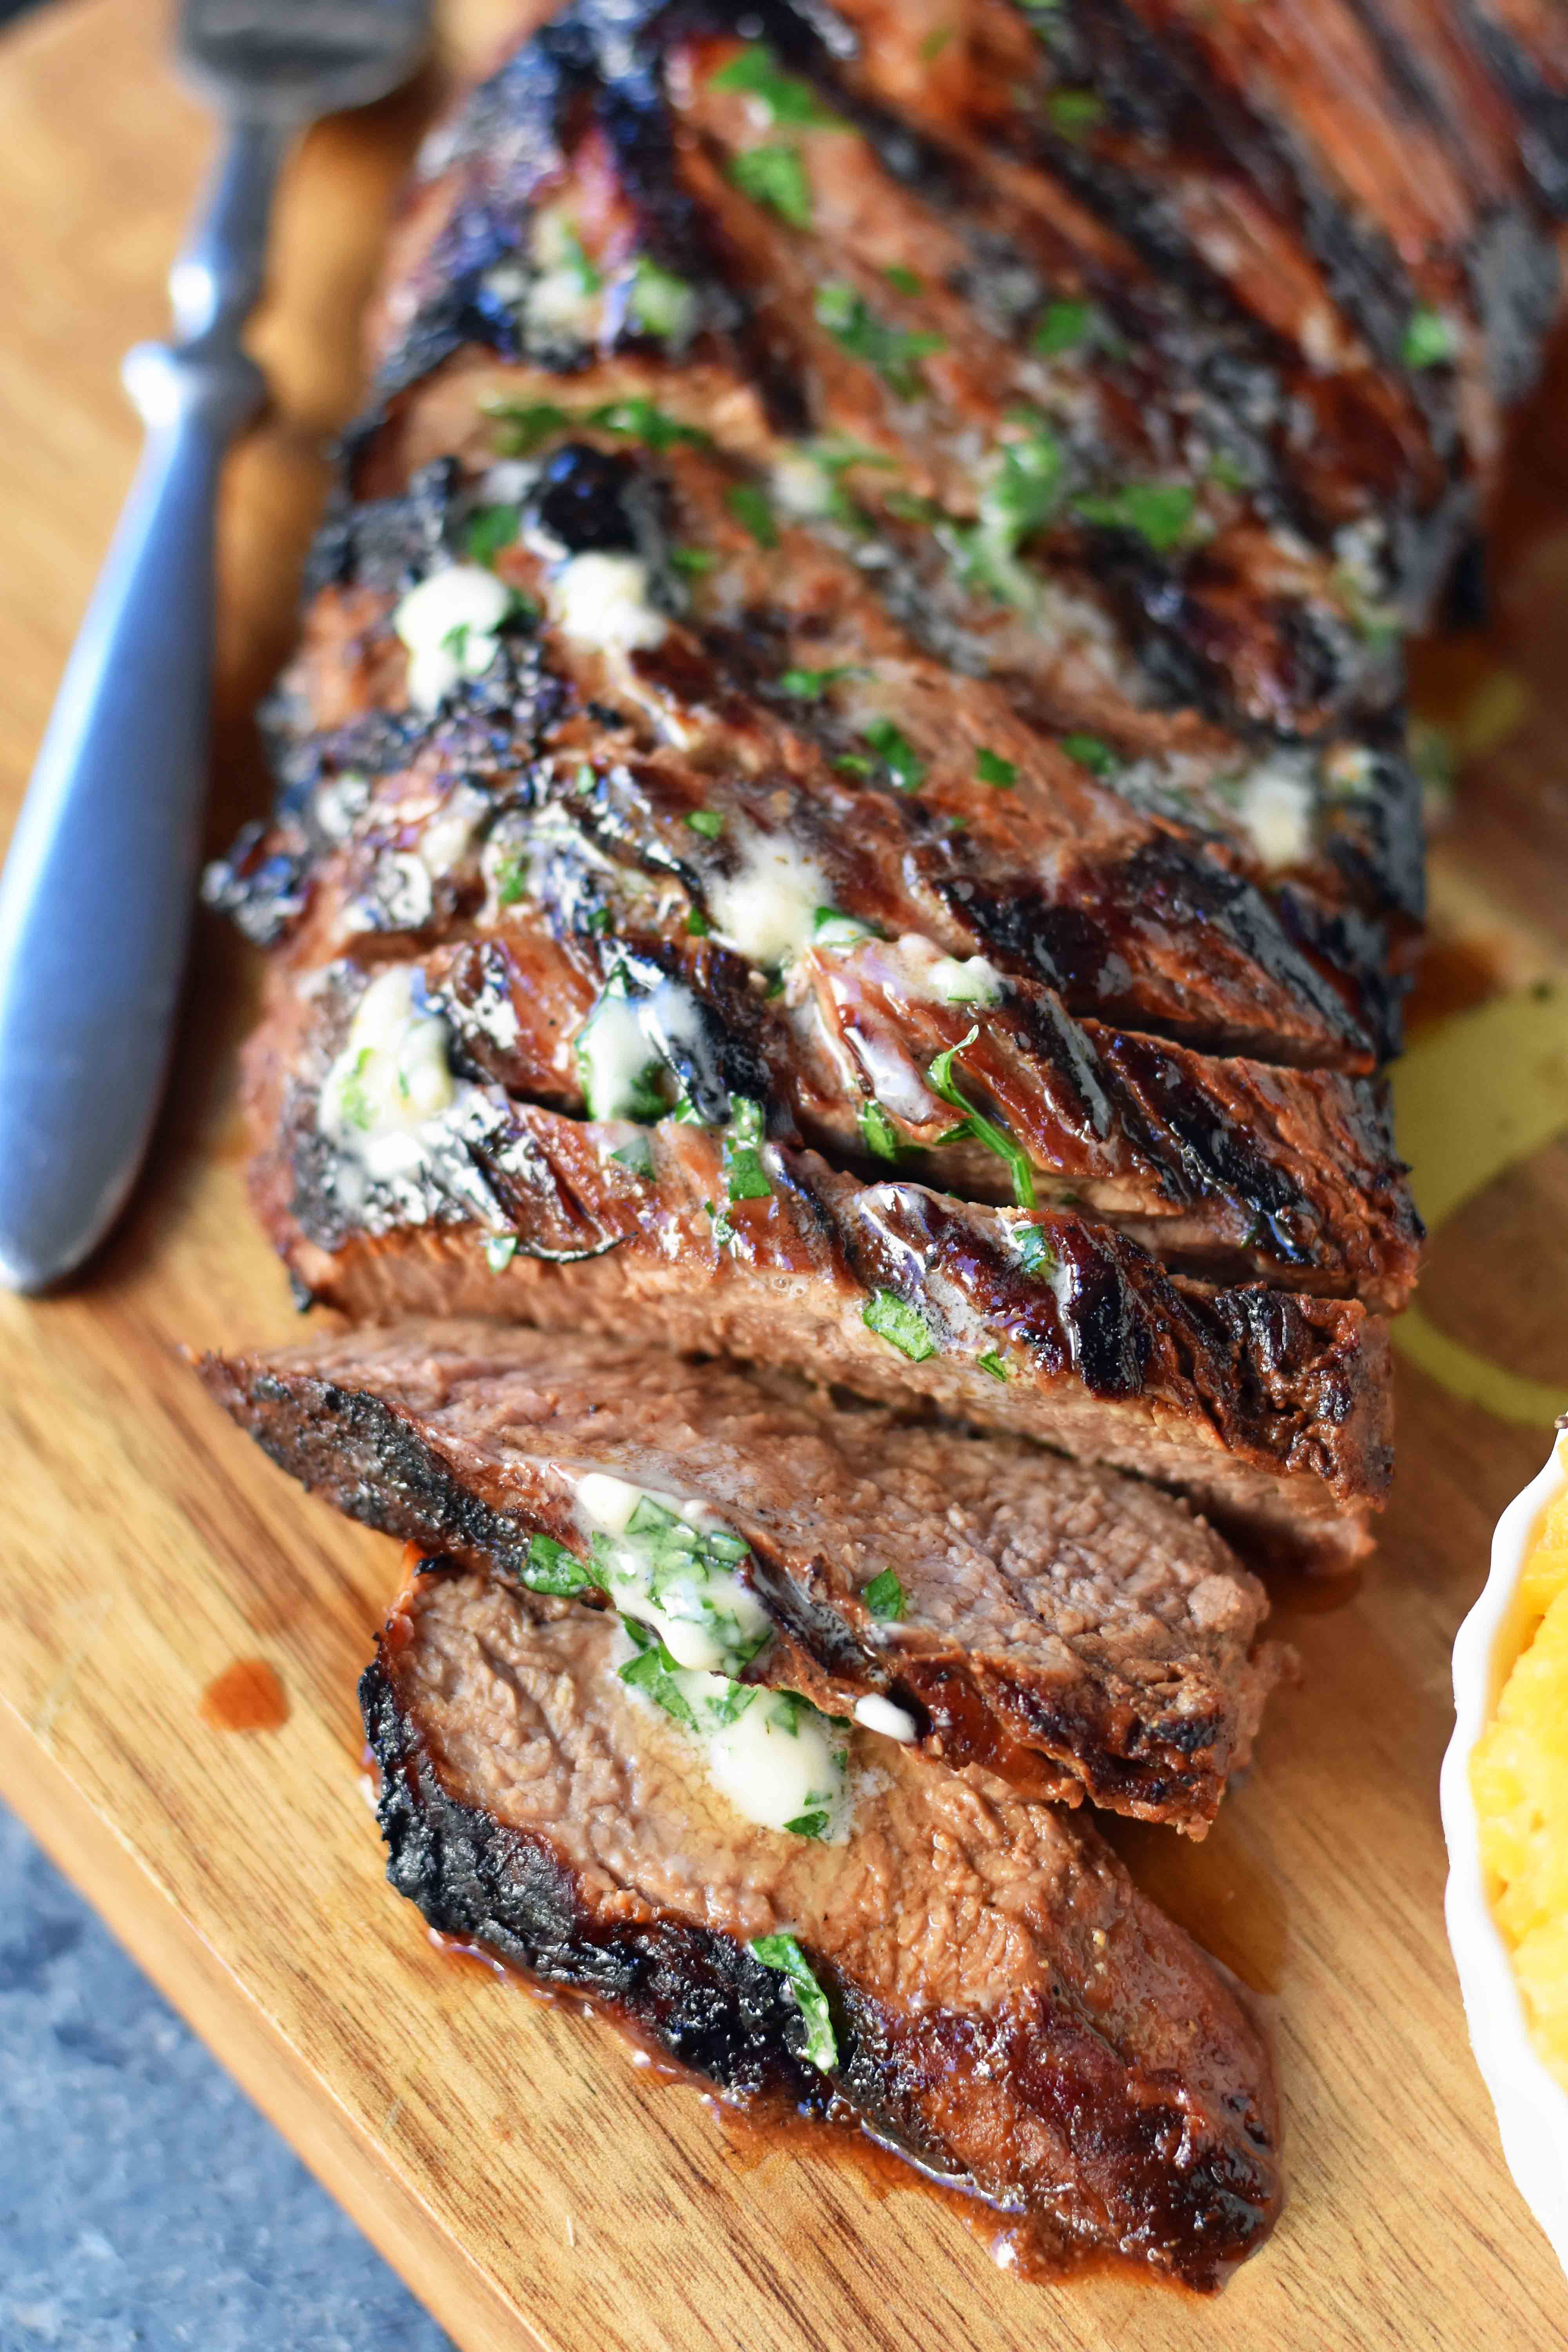 Grilled Tri-Tip Steak Marinade. How to make a juicy and flavorful tri-tip steak on the grill paired with Alexia premium side dishes. www.modernhoney.com